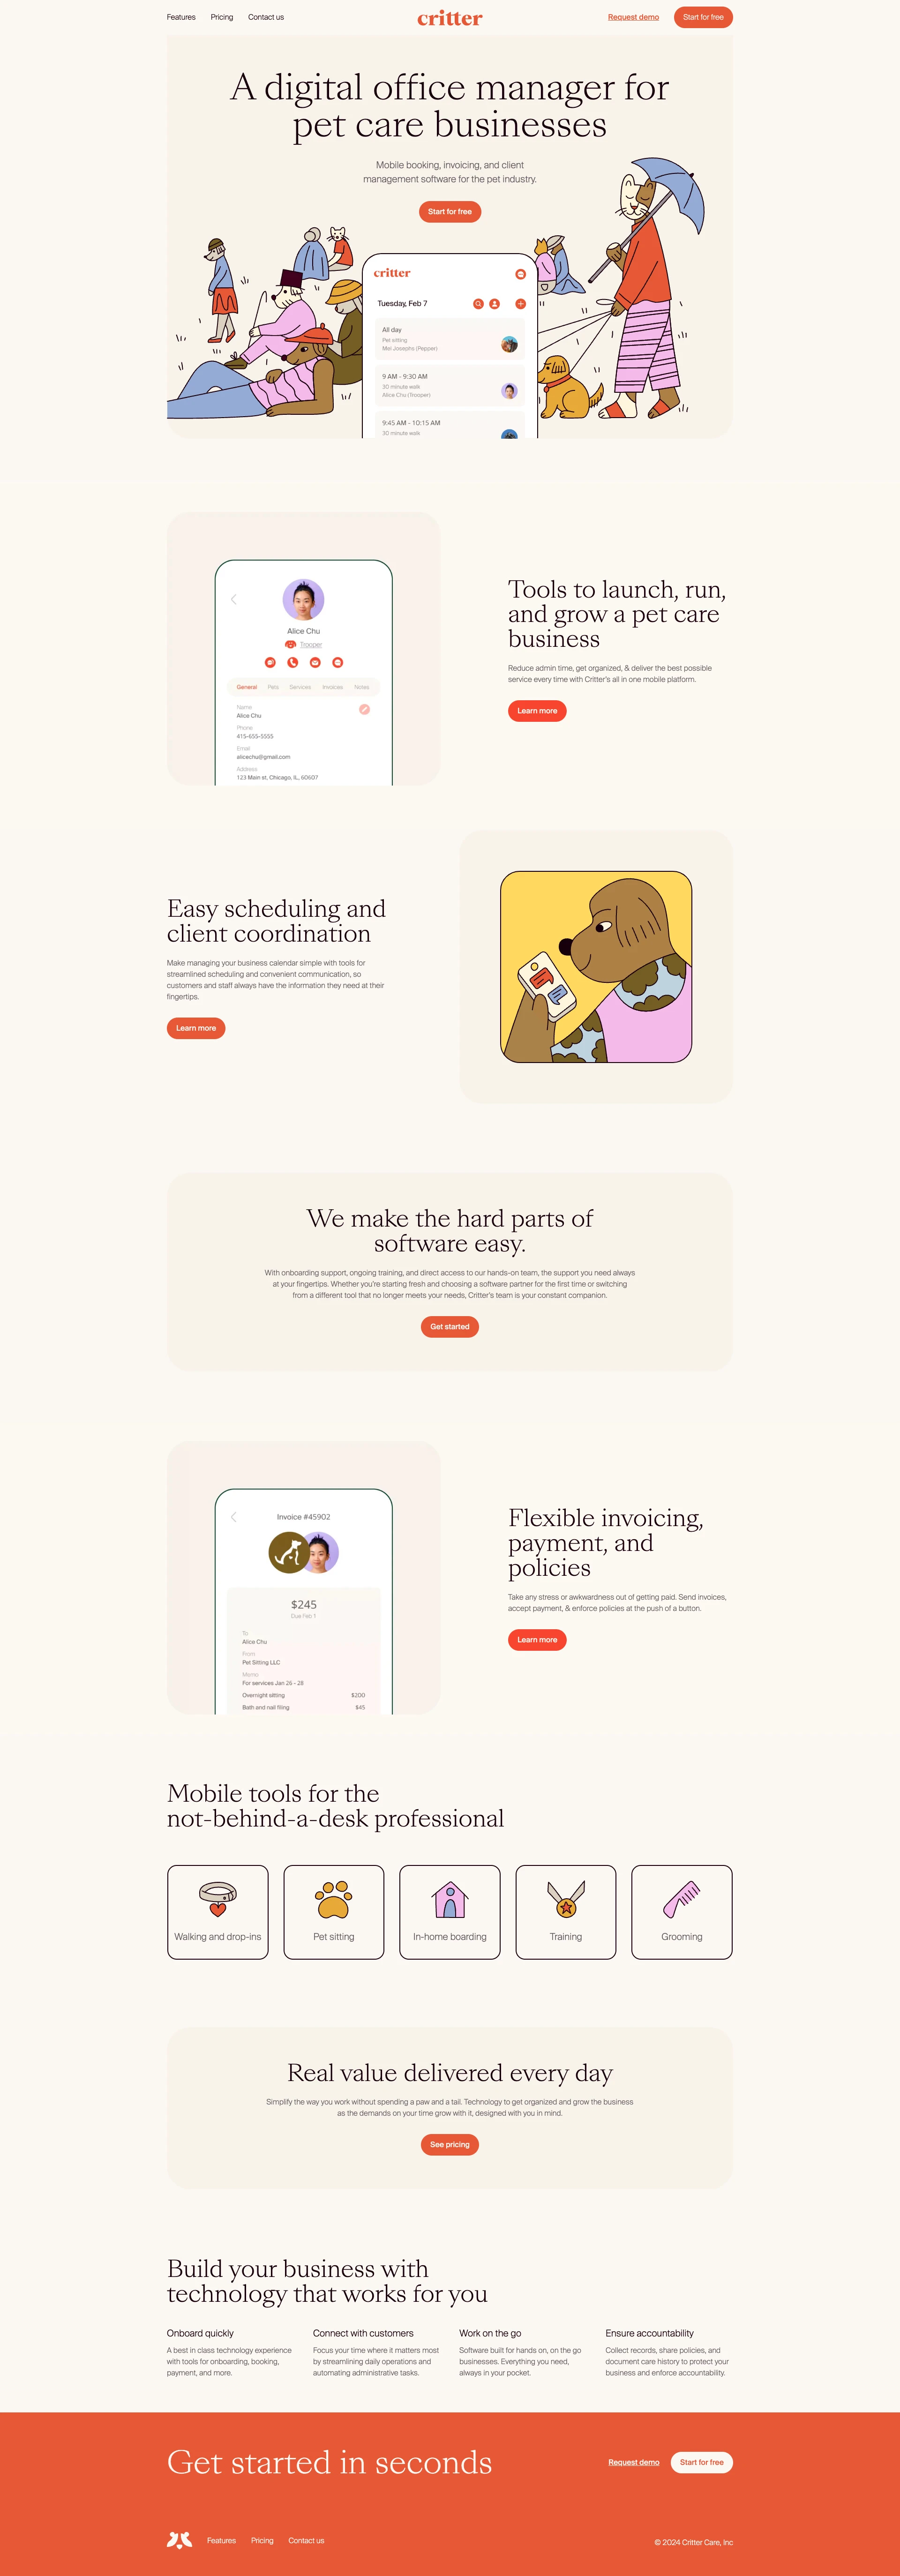 Critter Landing Page Example: The best mobile software for pet care businesses on the go, with tools for scheduling, invoicing, customer management, and communication.